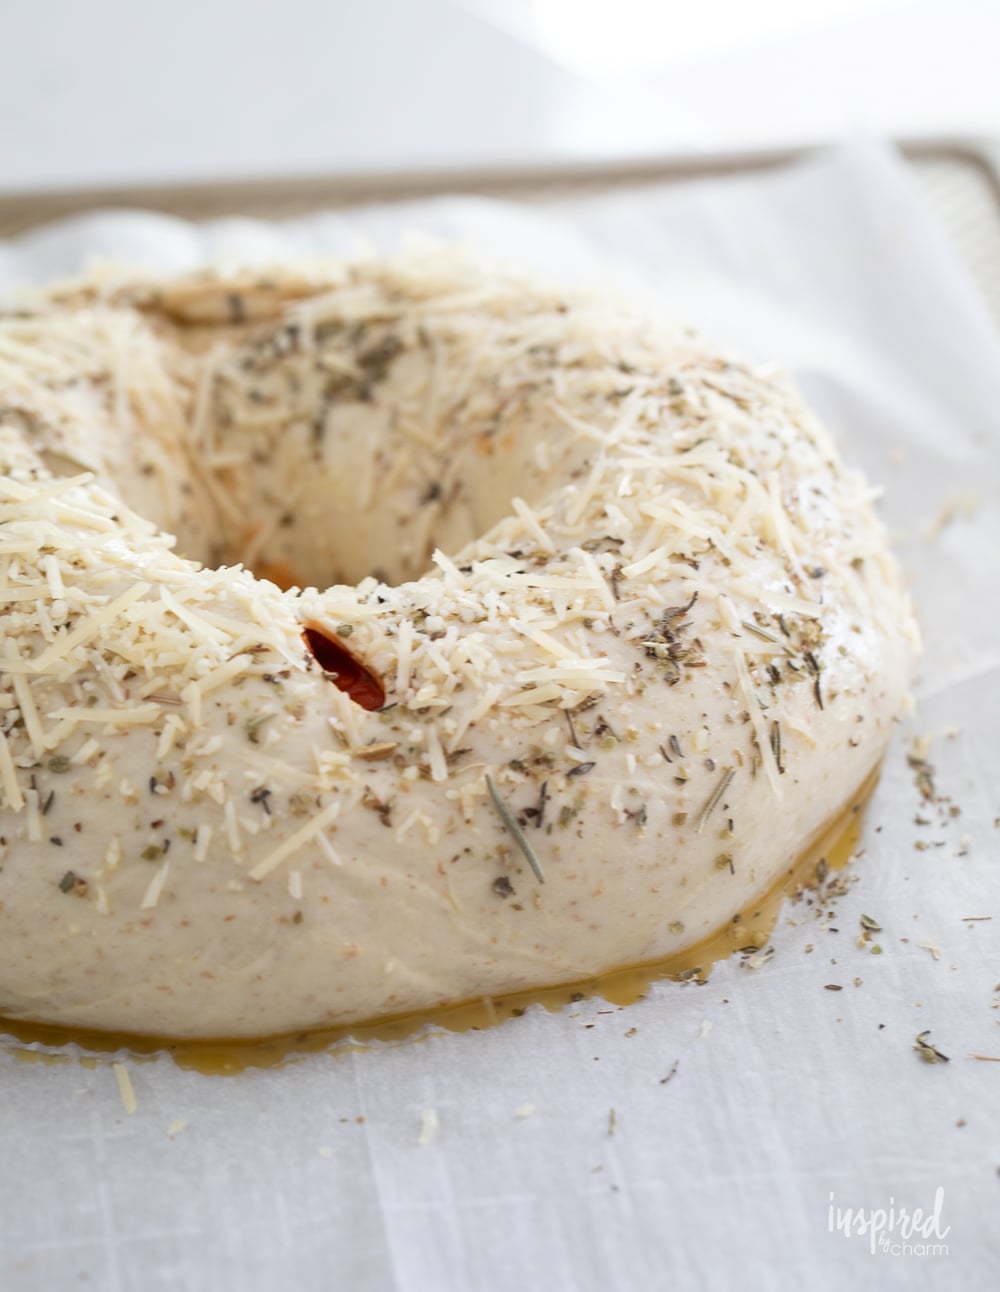 unbaked pizza ring sprinkled with herbs and parmesan cheese.